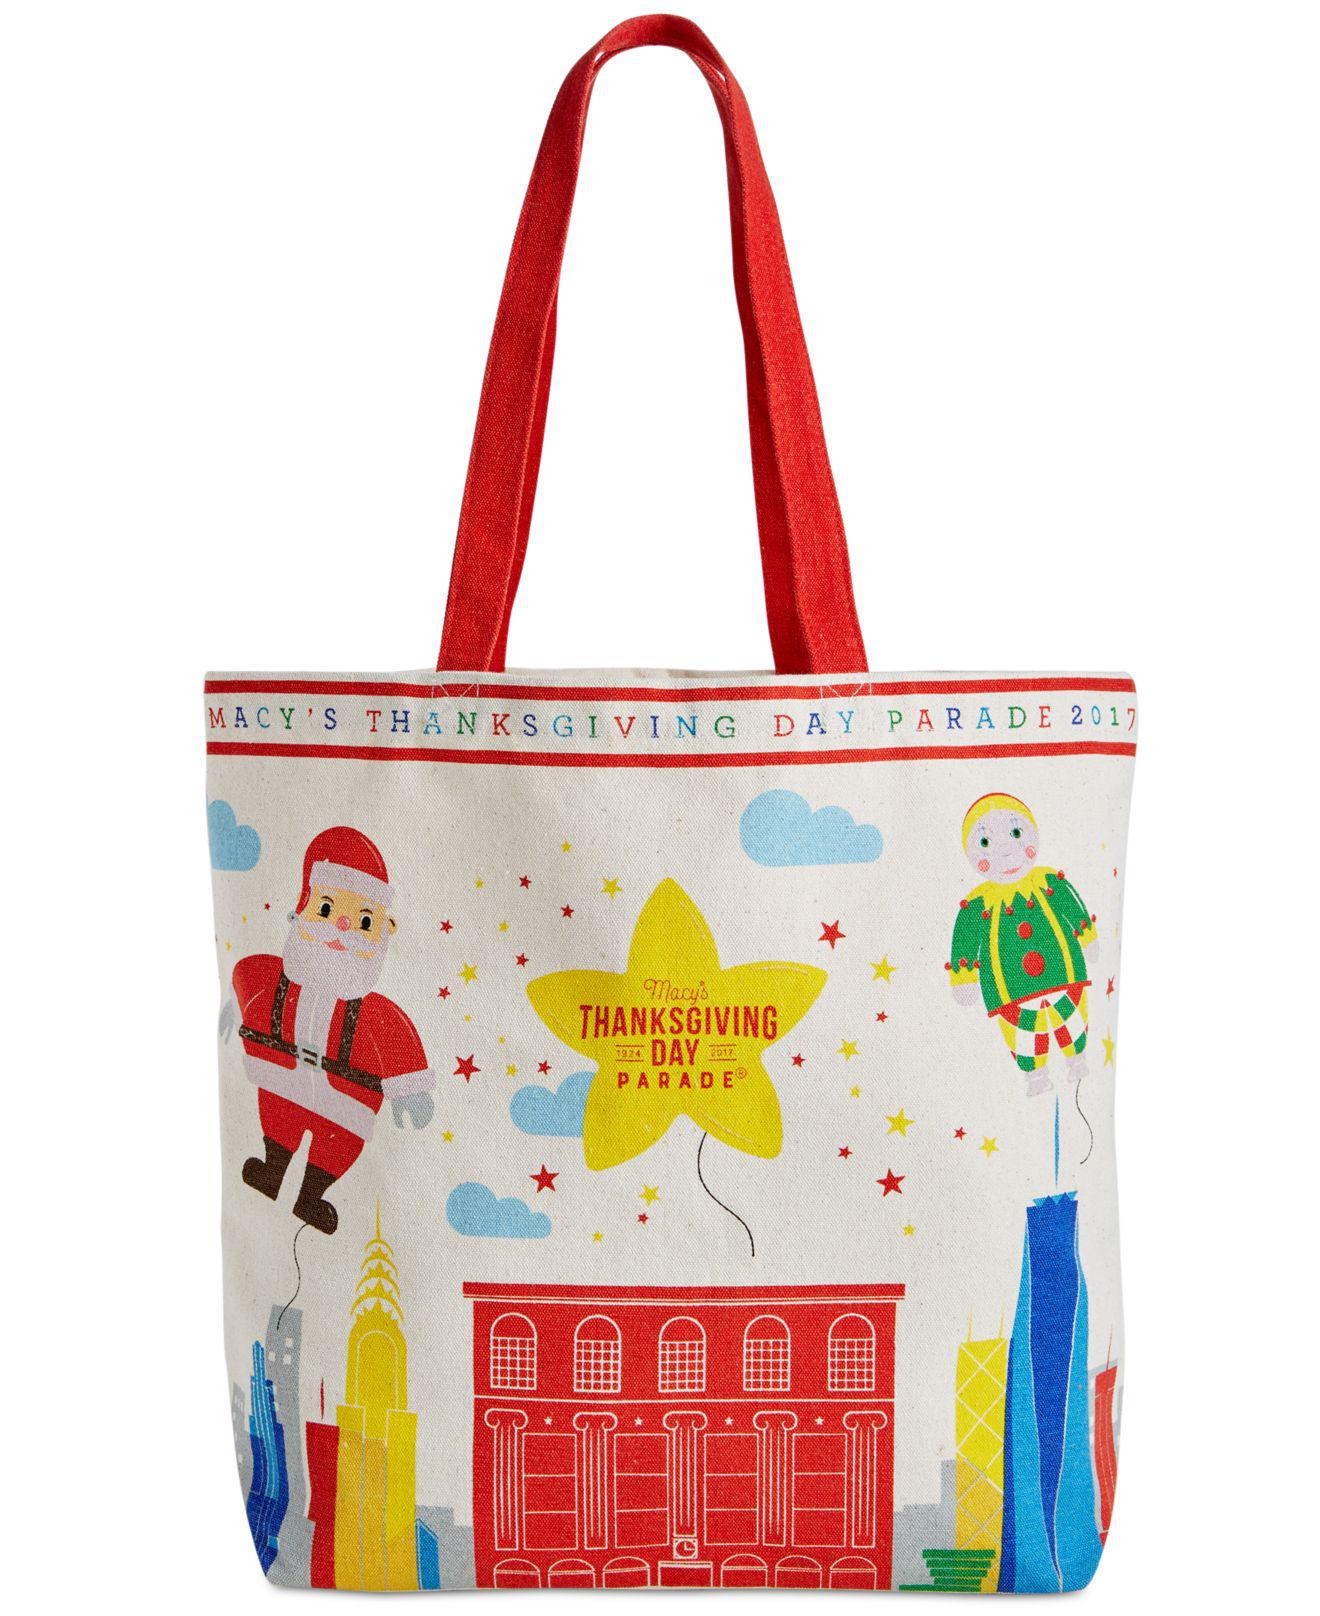 Macy's Canvas Thanksgiving Day Parade Large Tote Bag in Red - Lyst